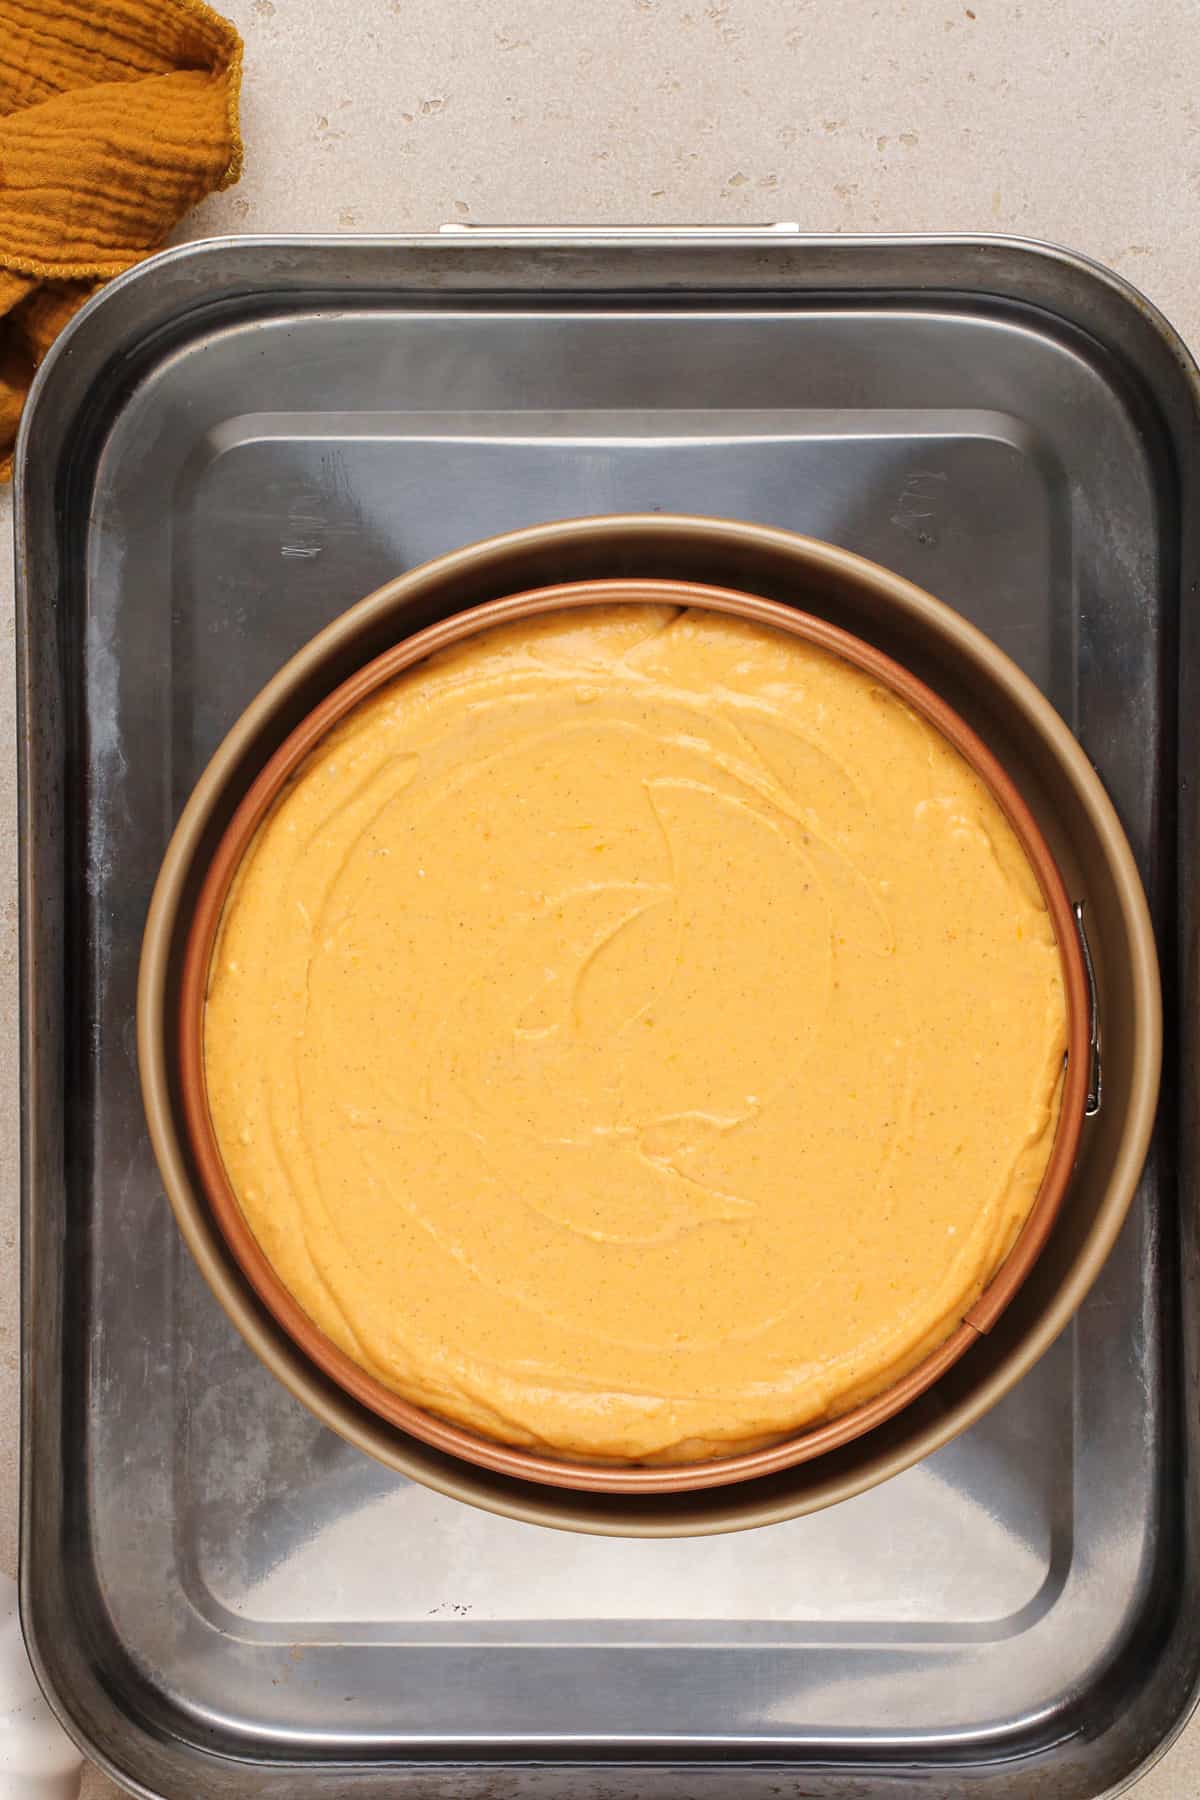 Unbaked sweet potato cheesecake in a water bath, ready to go in the oven.